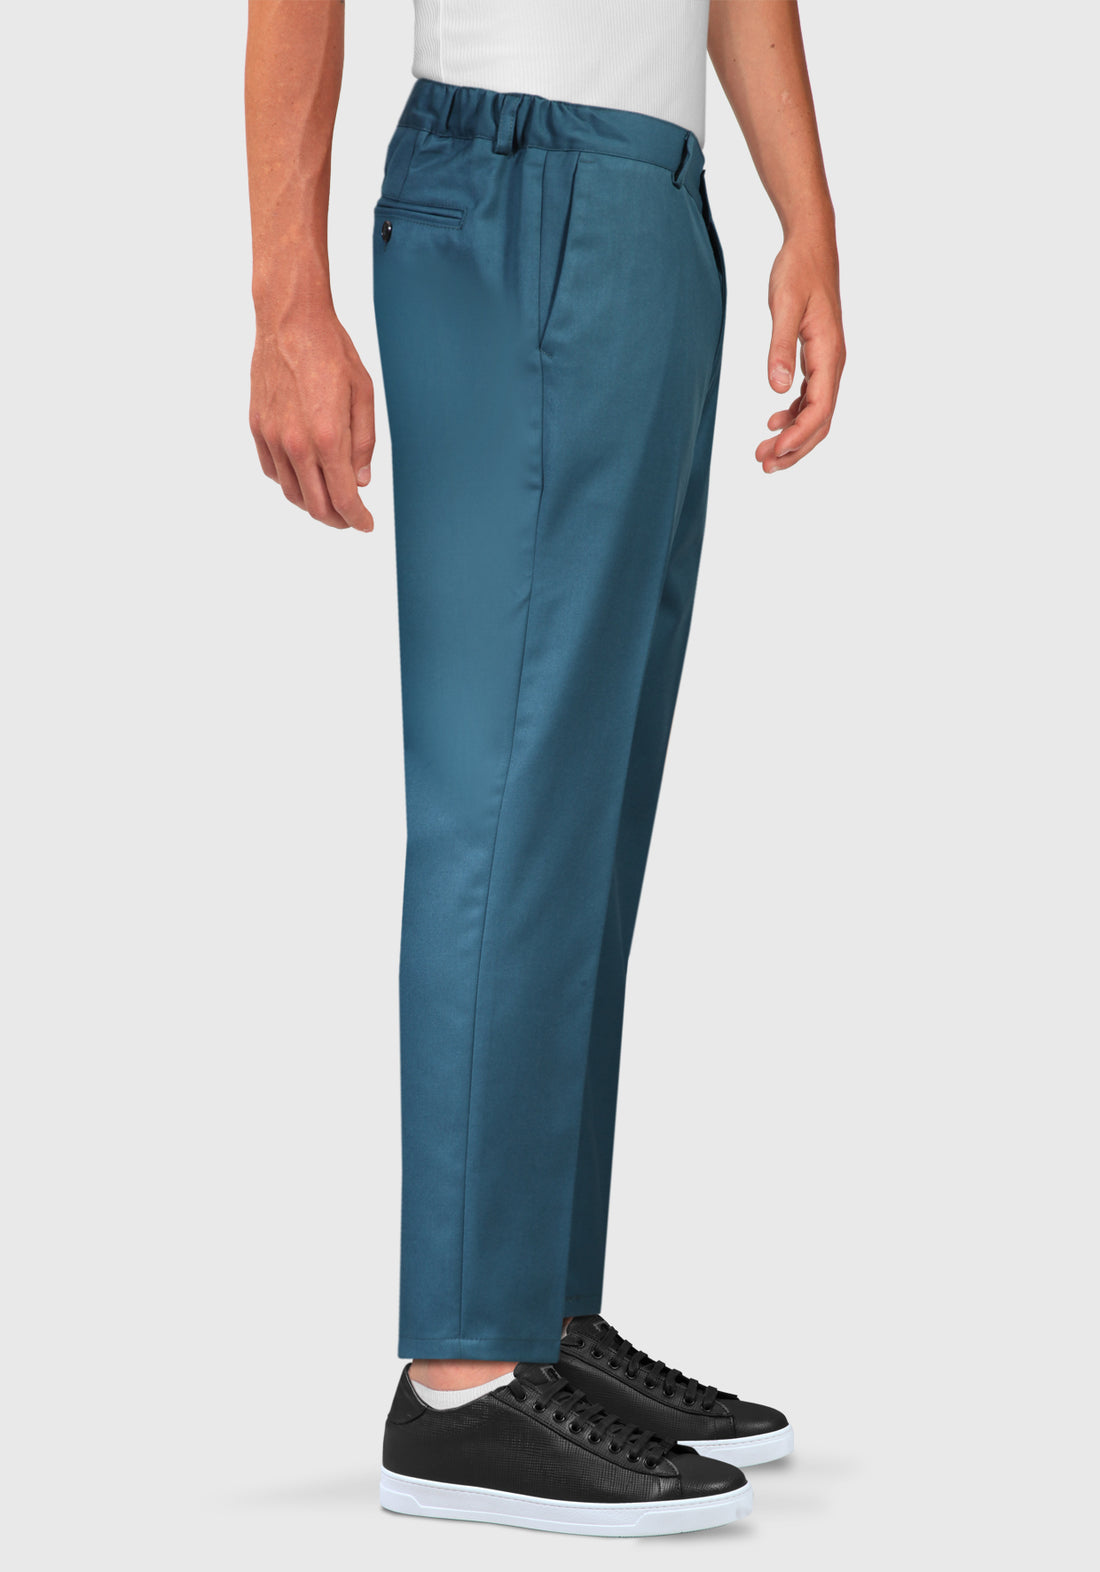 Half-breasted trousers dress with side elastics - Ottanio